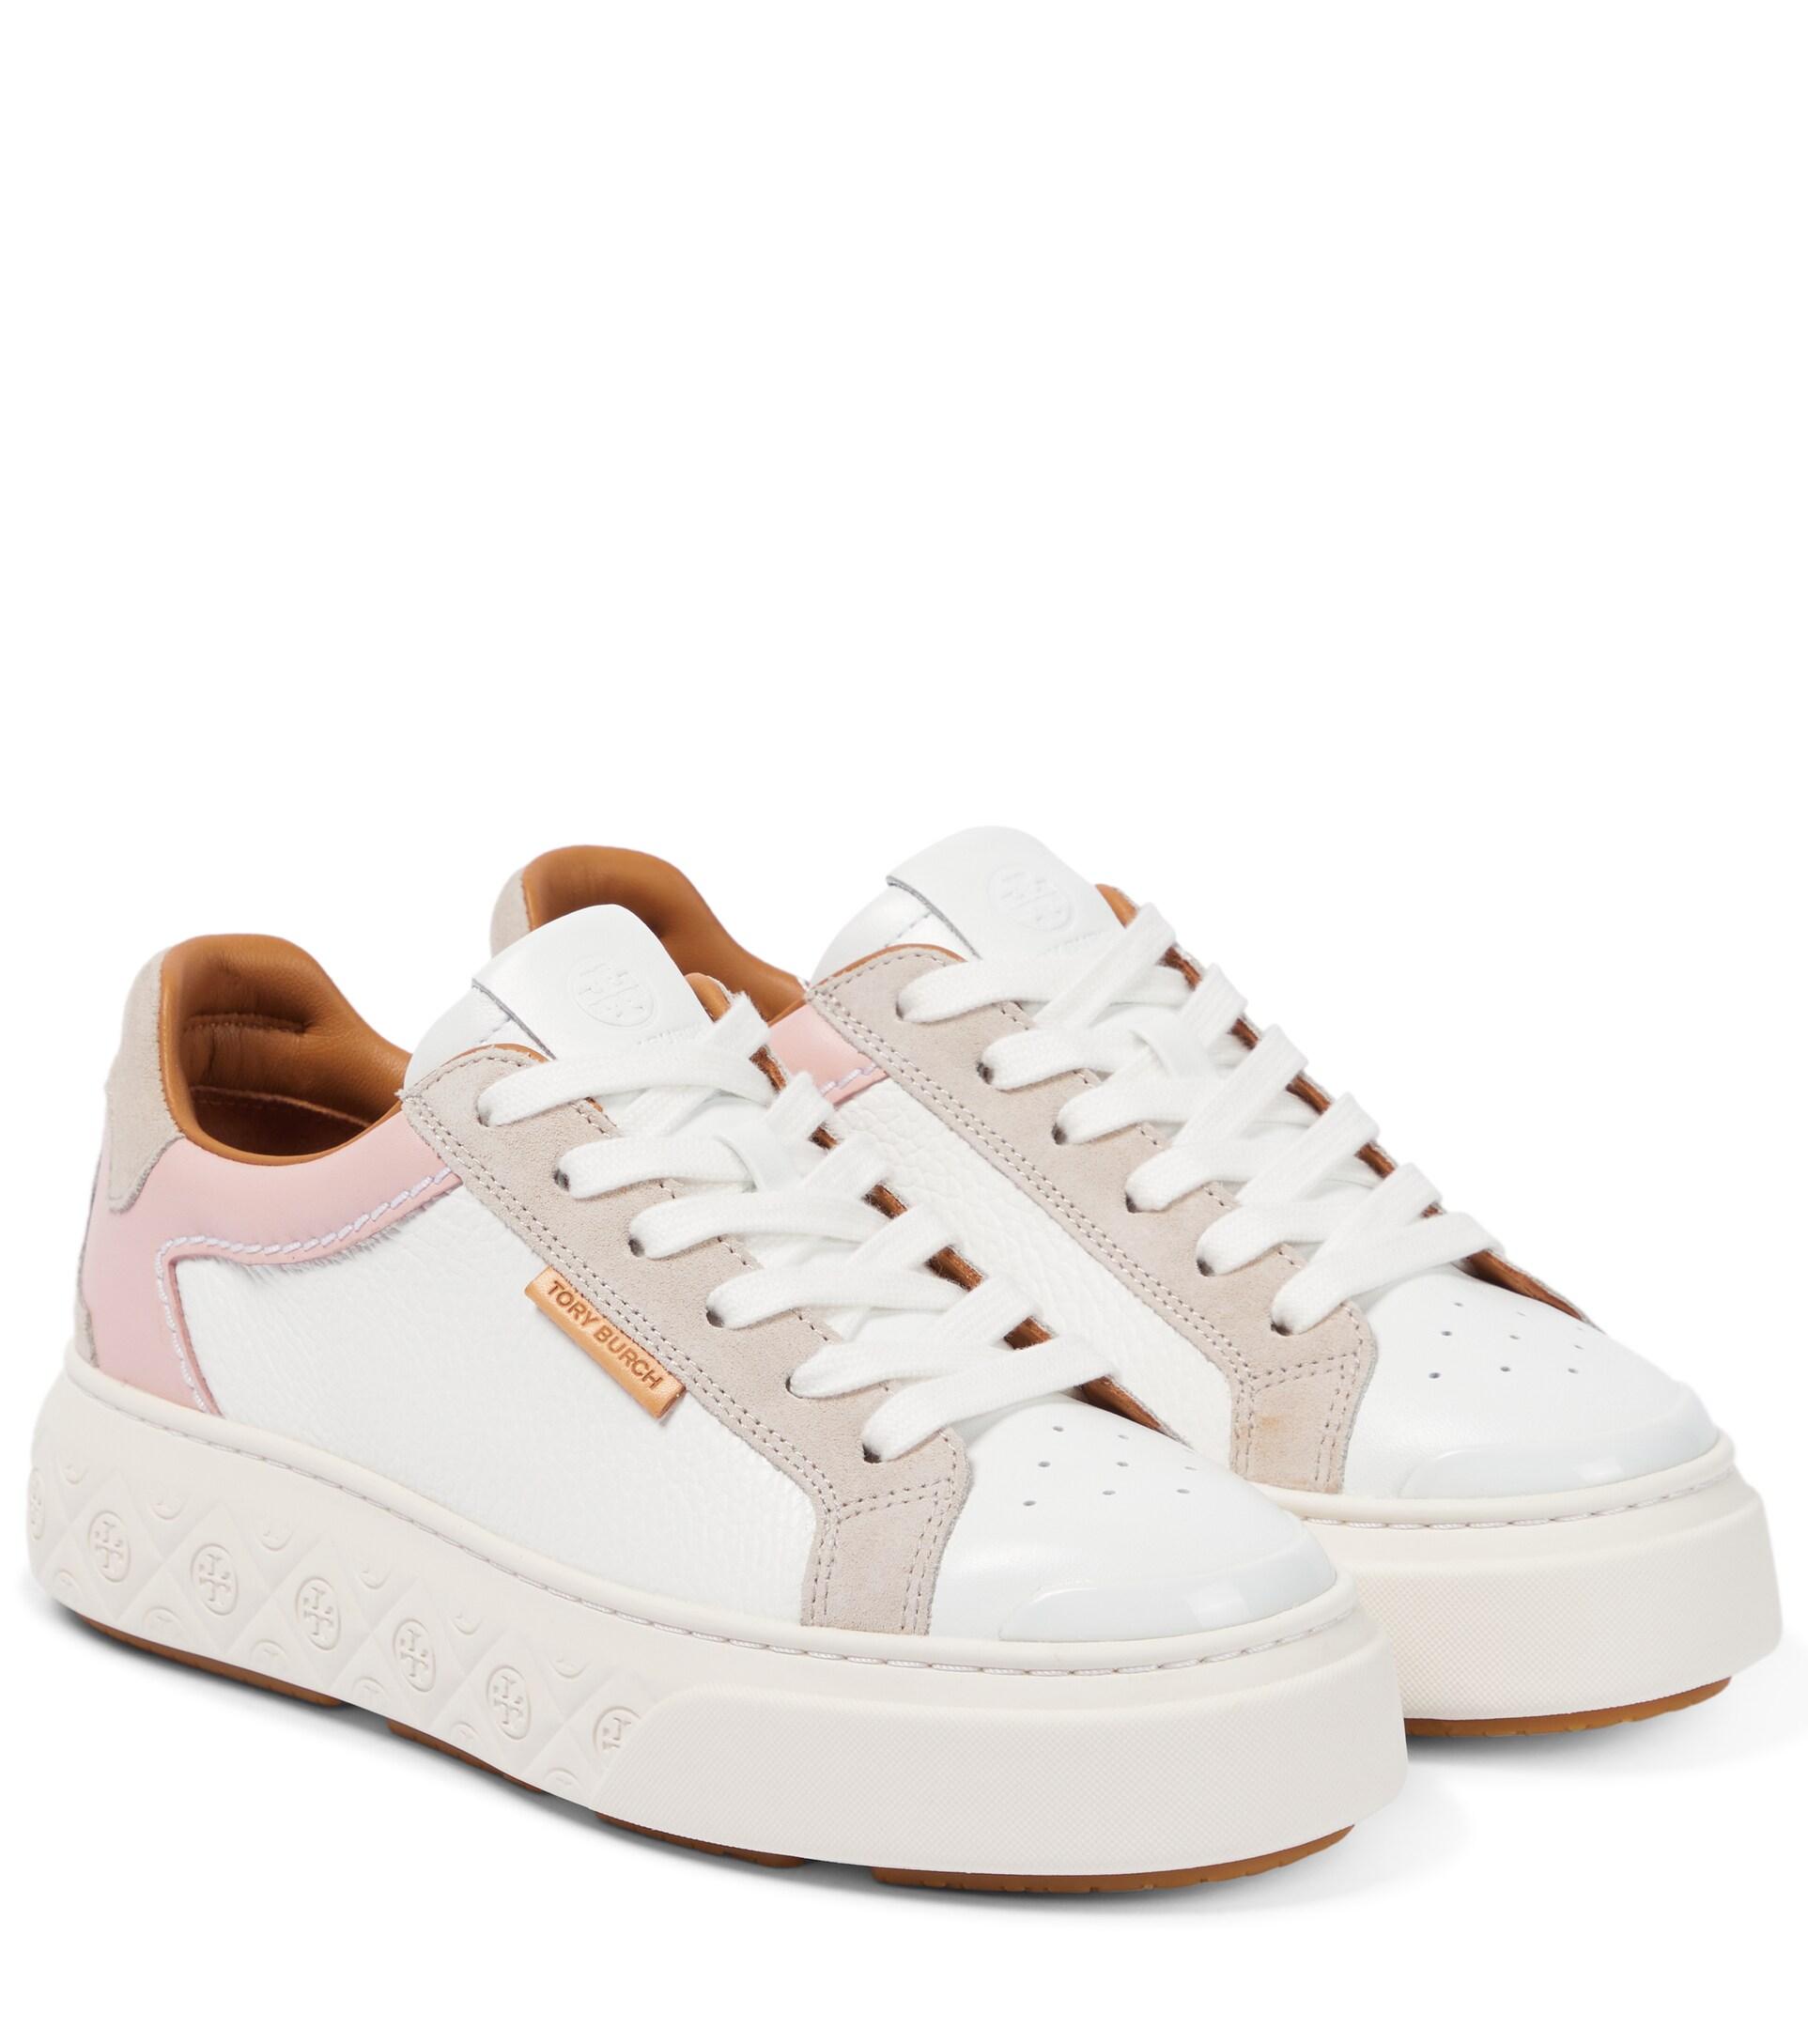 Tory Burch Ladybug Leather Sneakers in White | Lyst